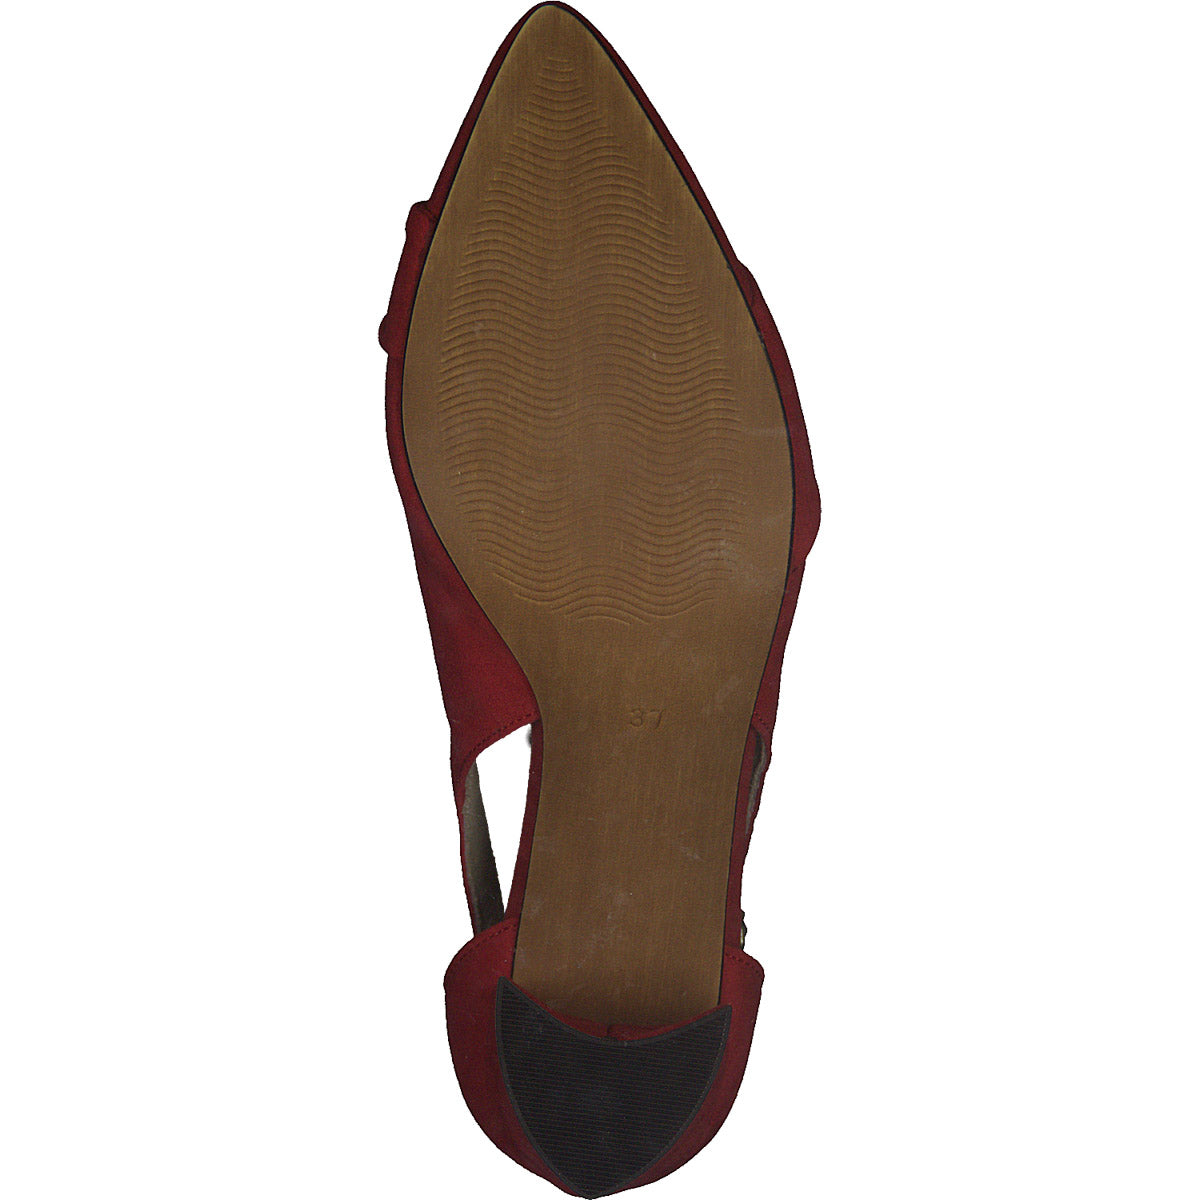 Red Block Heel with Open Sides